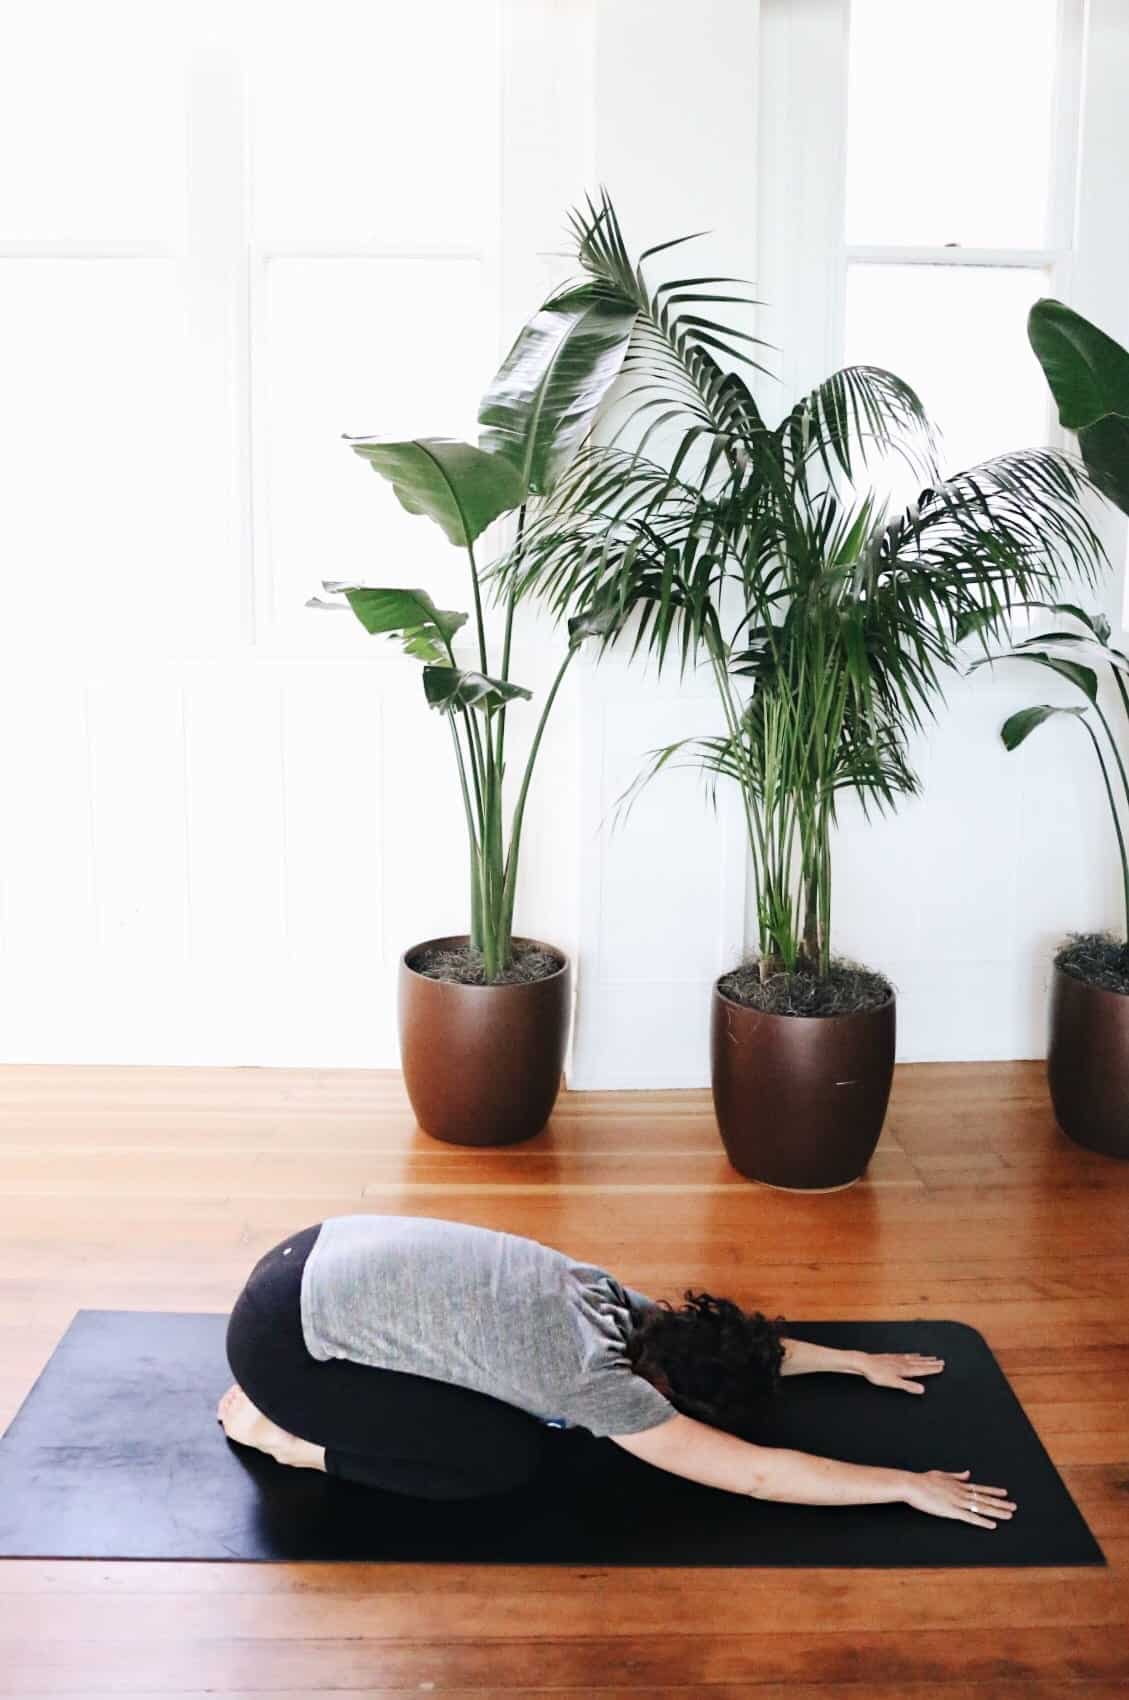 Feeling stressed-out and overwhelmed? Try yoga for stress relief! Here are 8 yoga poses to relieve your stress, allow you to feel more grounded and tackle life with energy and compassion. #stressrelief #yogaforstress